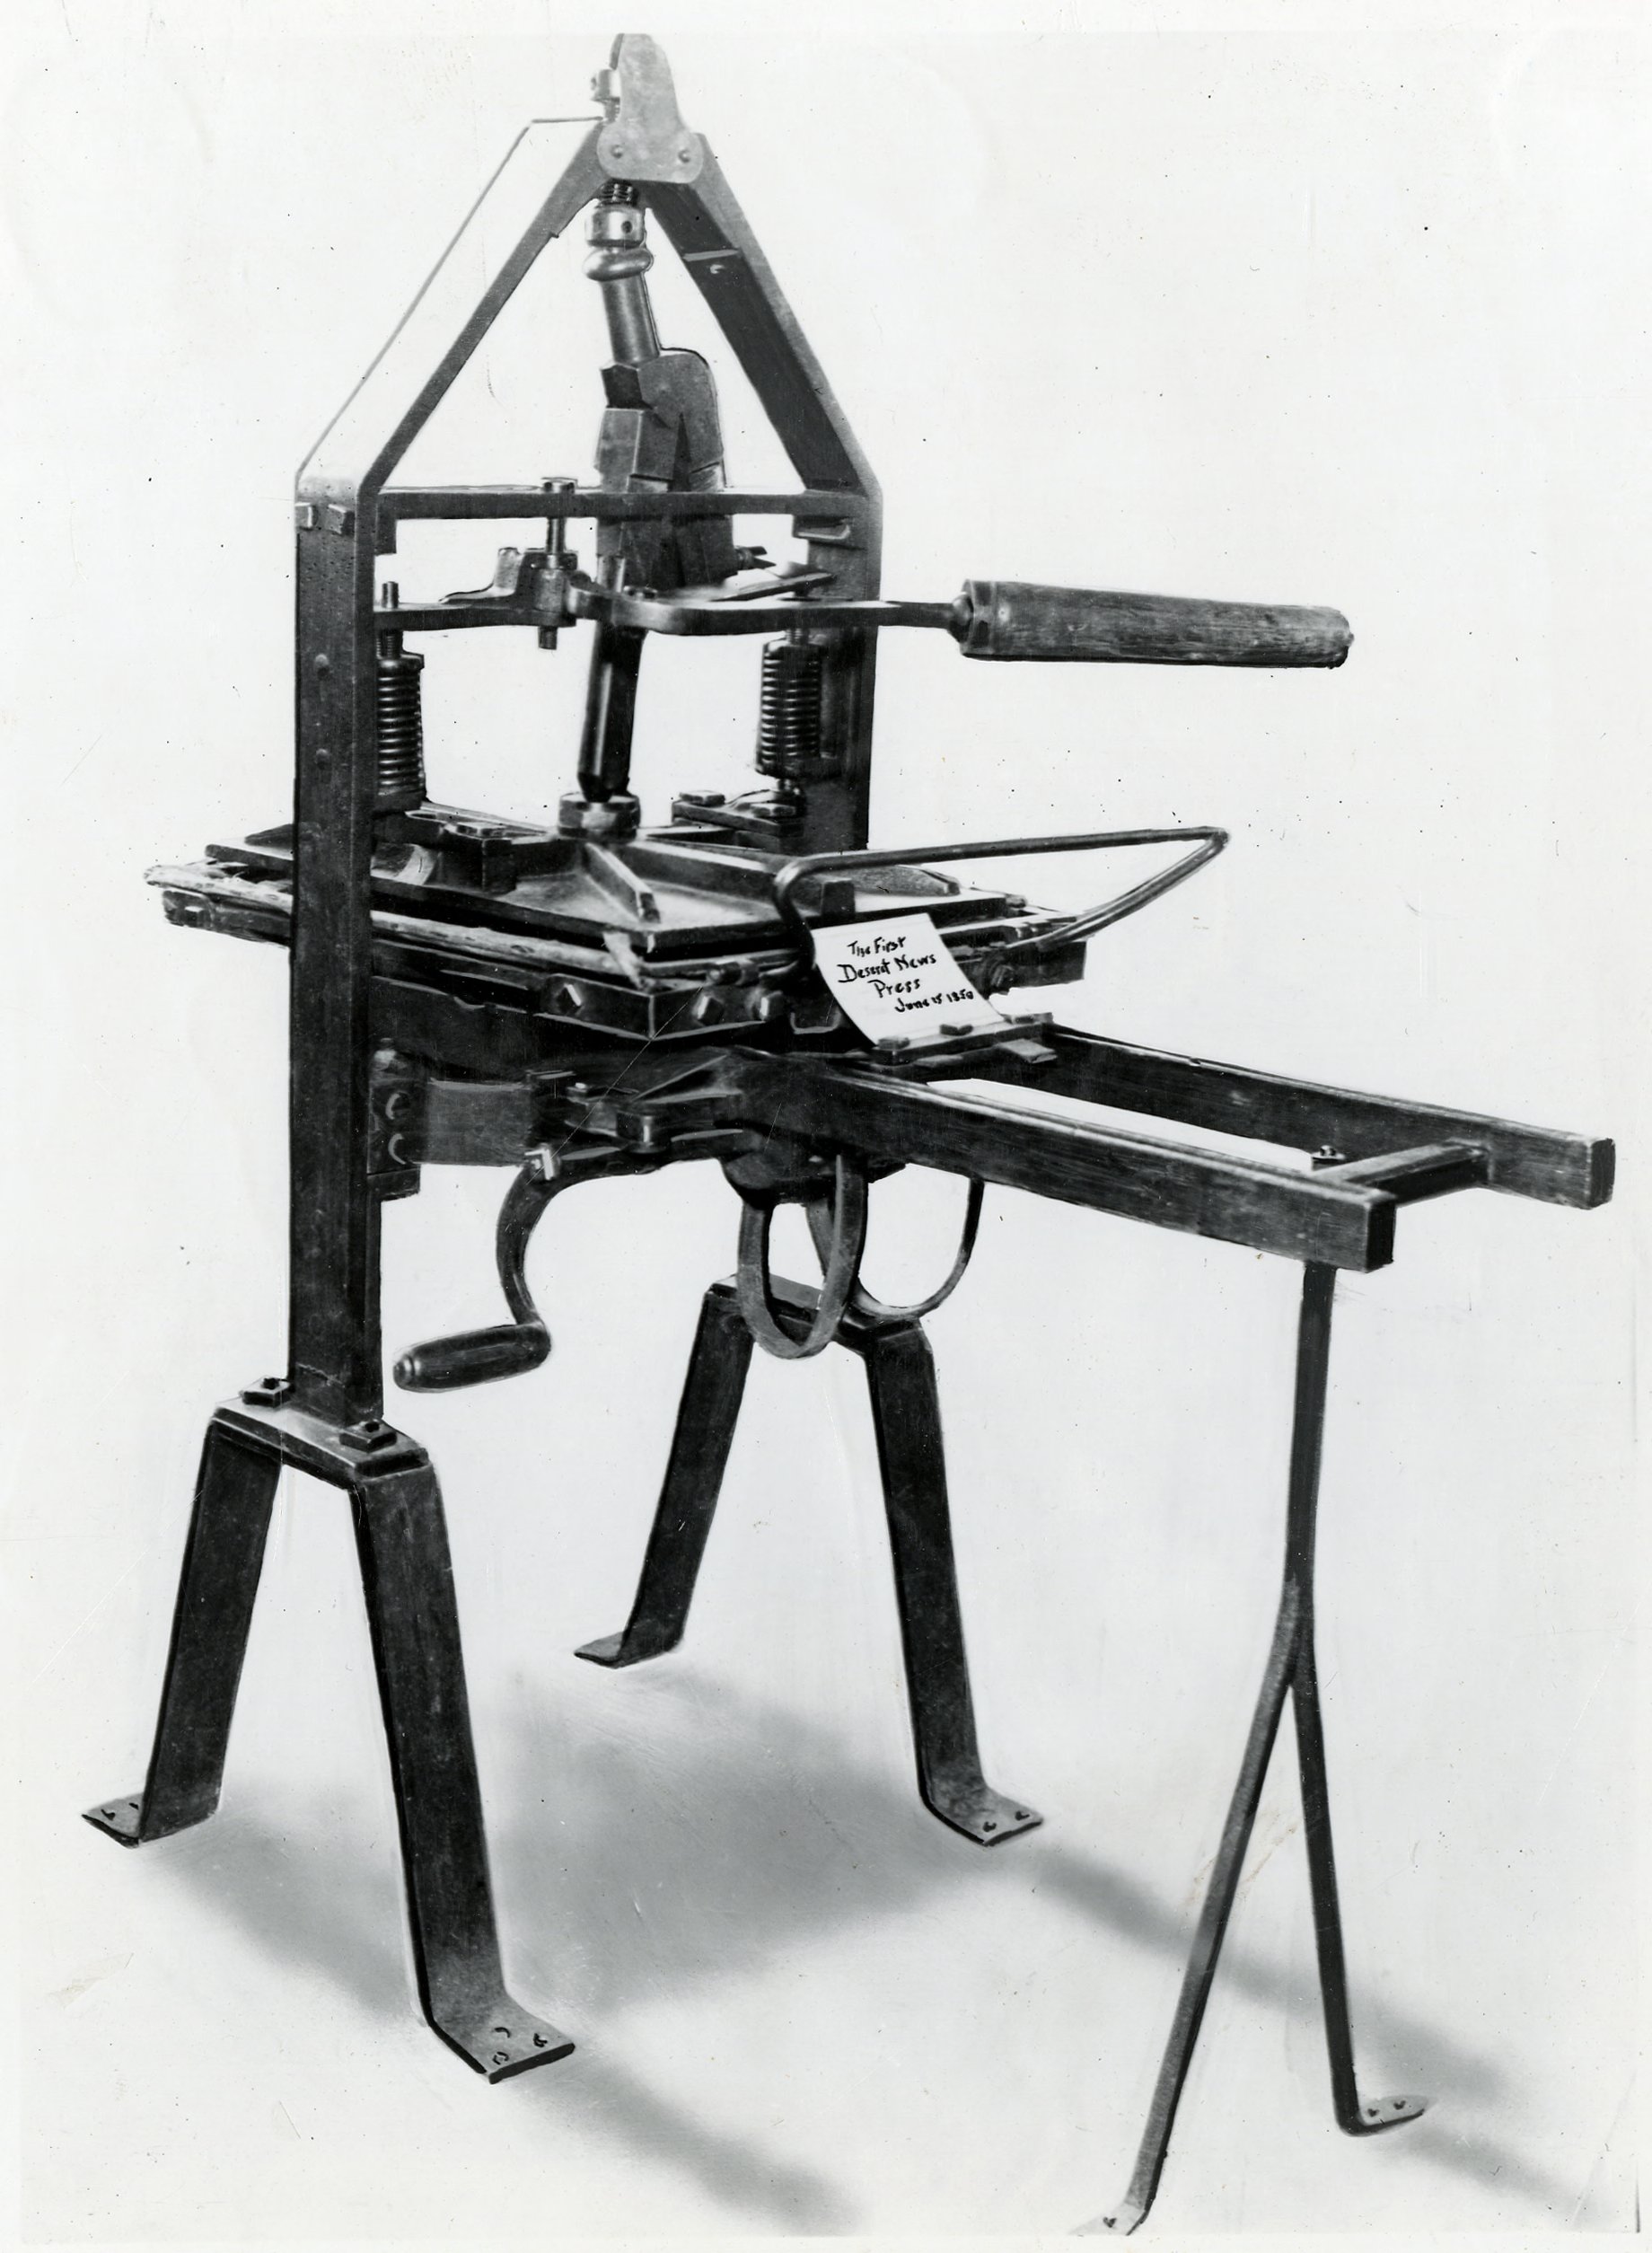 One of the first printing presses for the Deseret News in 1850.